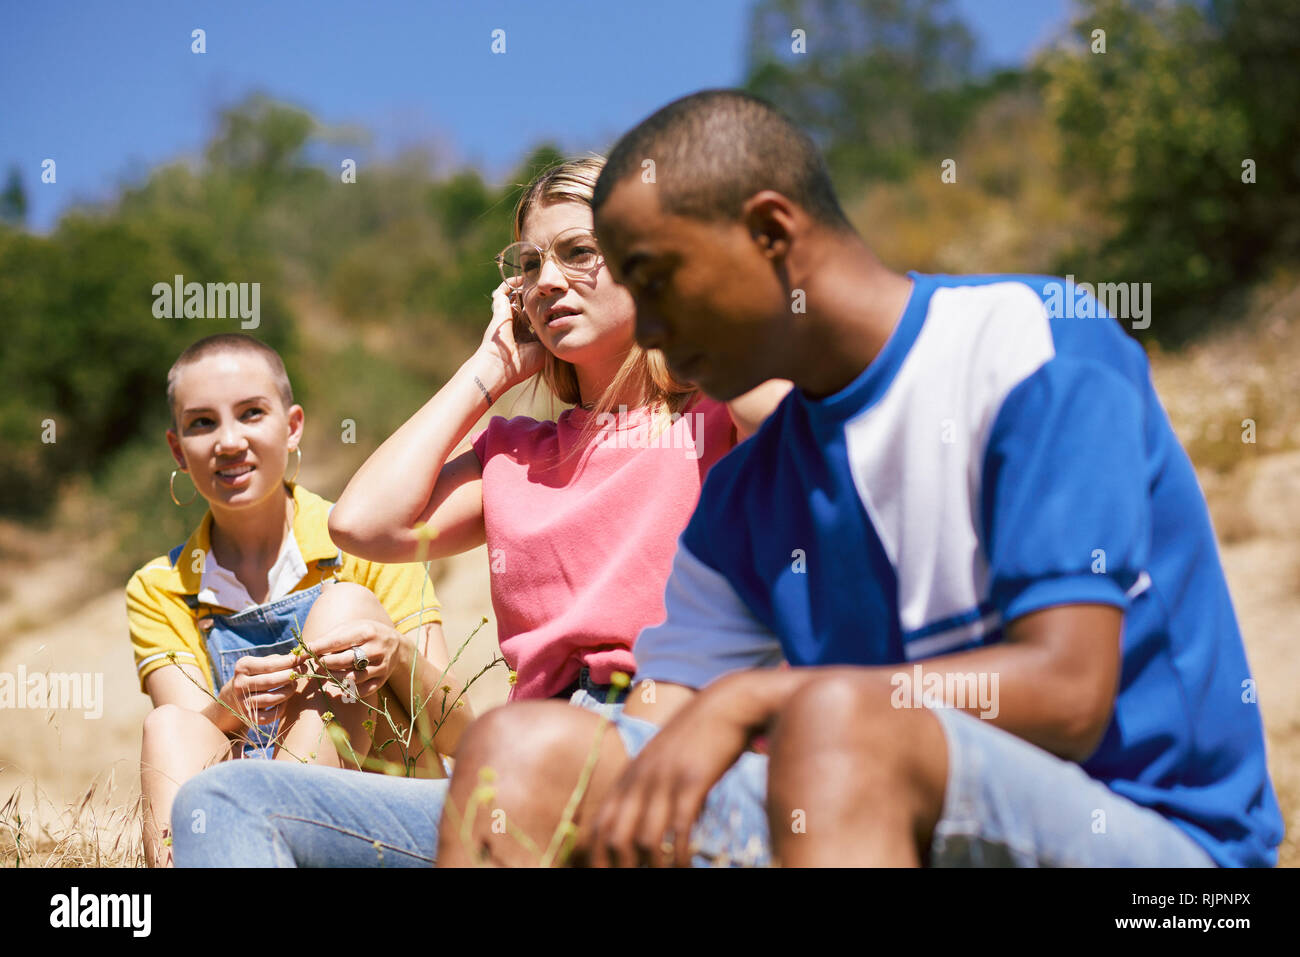 Three young adult friends sitting by dirt track, Los Angeles, California, USA Stock Photo